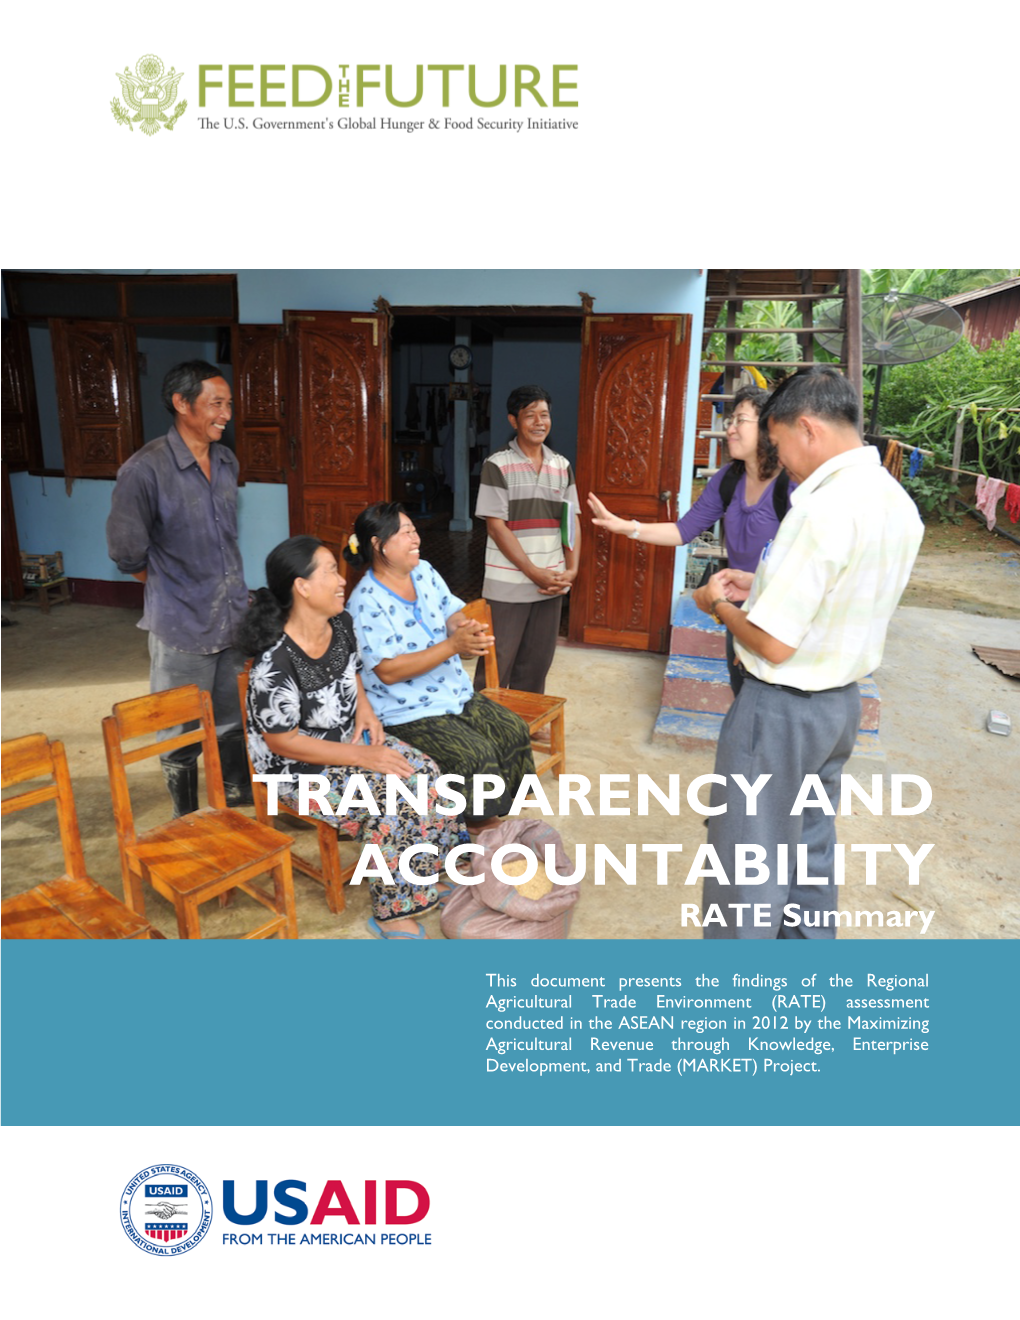 TRANSPARENCY and ACCOUNTABILITY RATE Summary